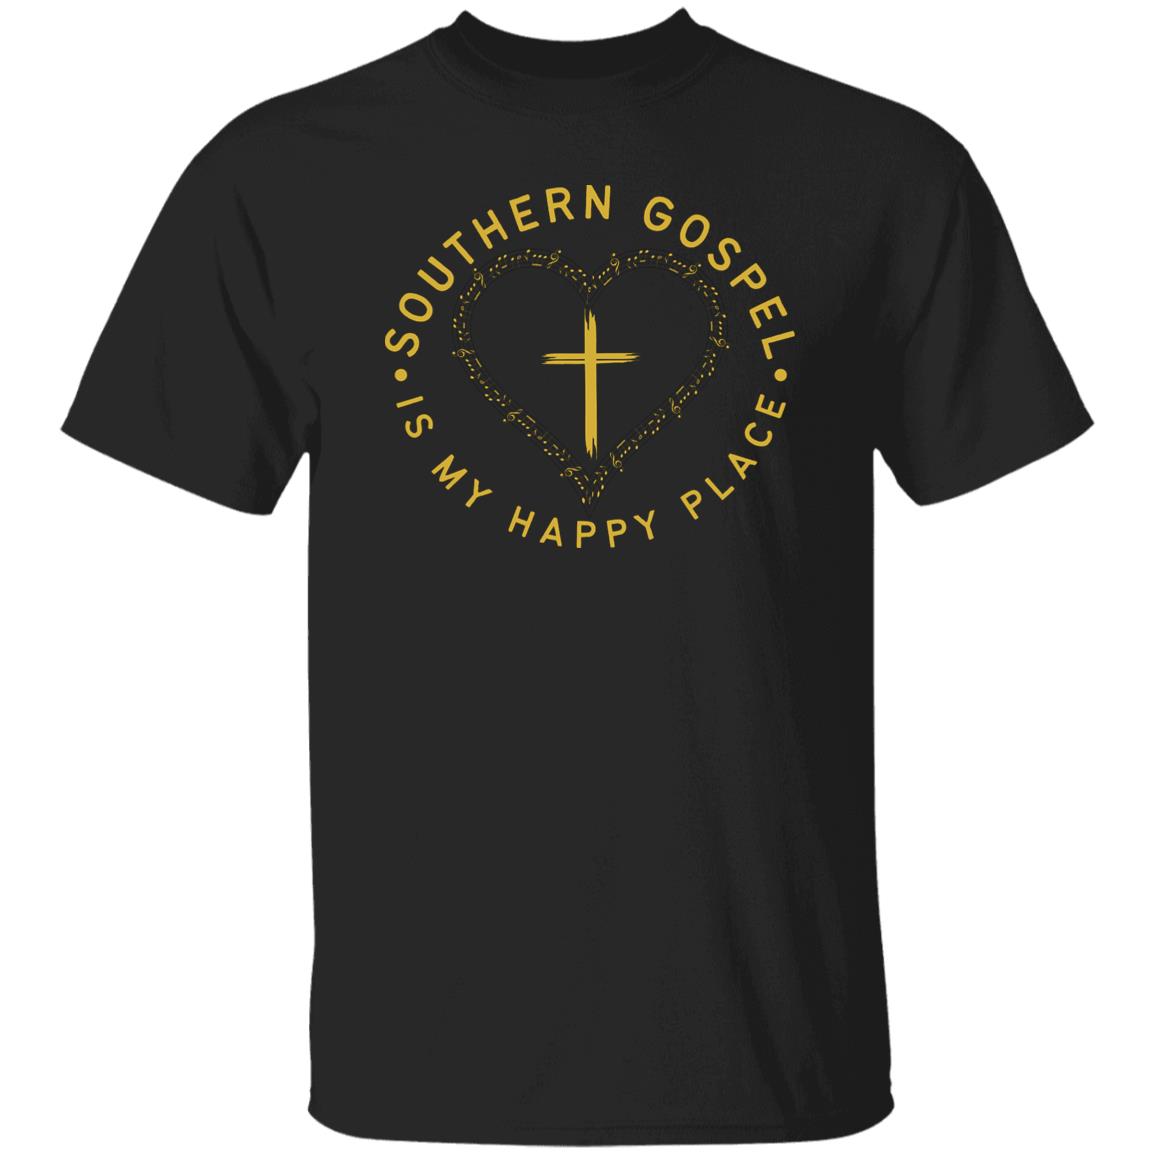 Southern Gospel Is My Happy Place T-Shirt